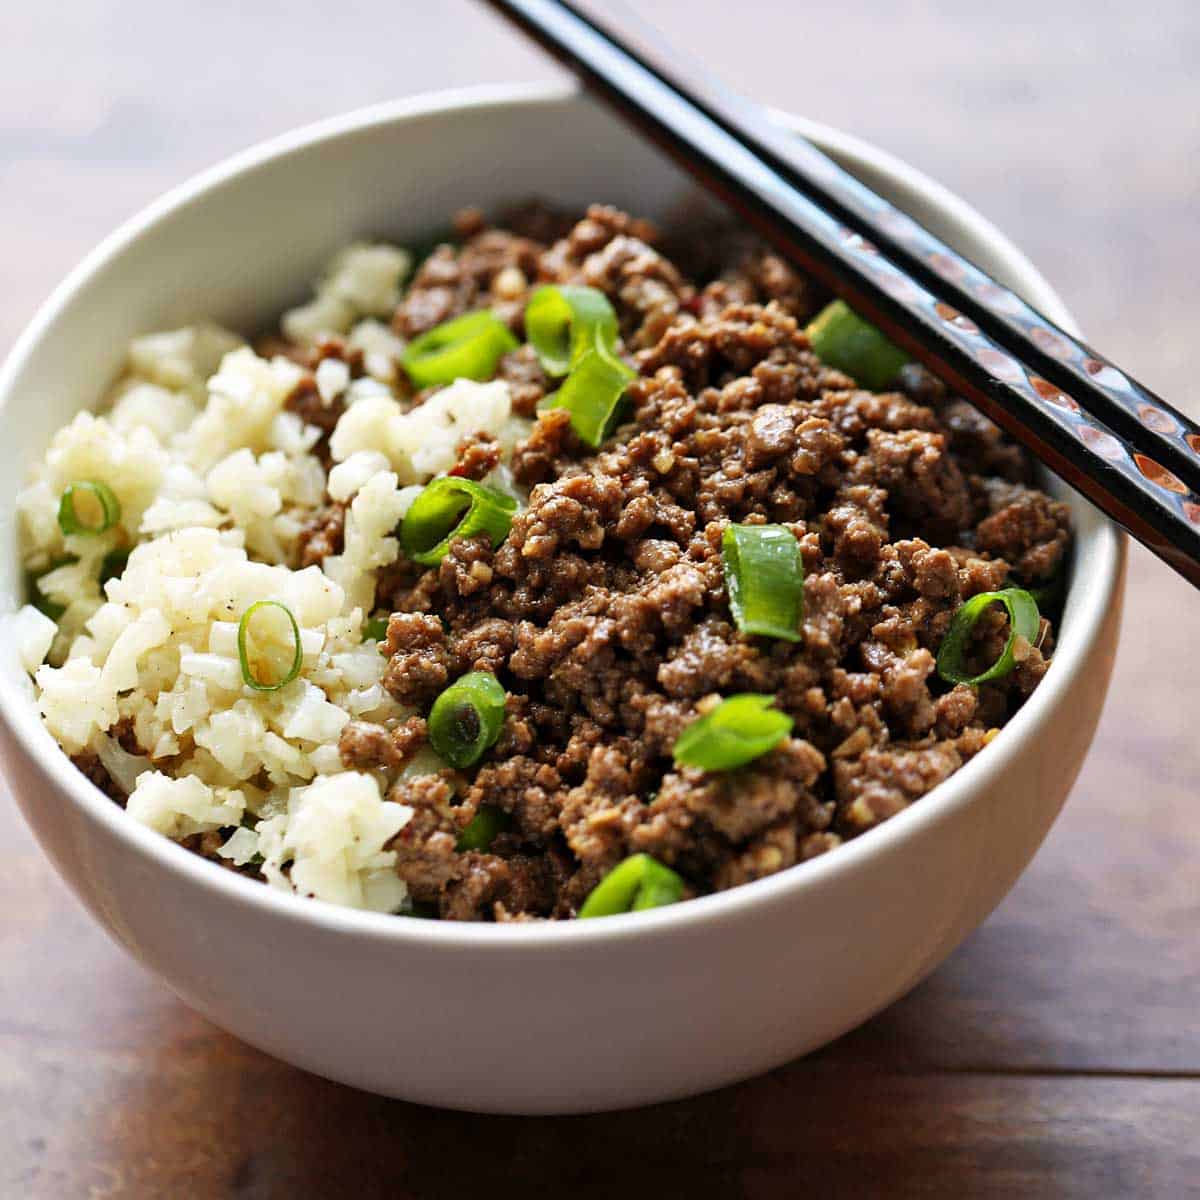 Korean ground beef is served in a bowl with chopsticks.